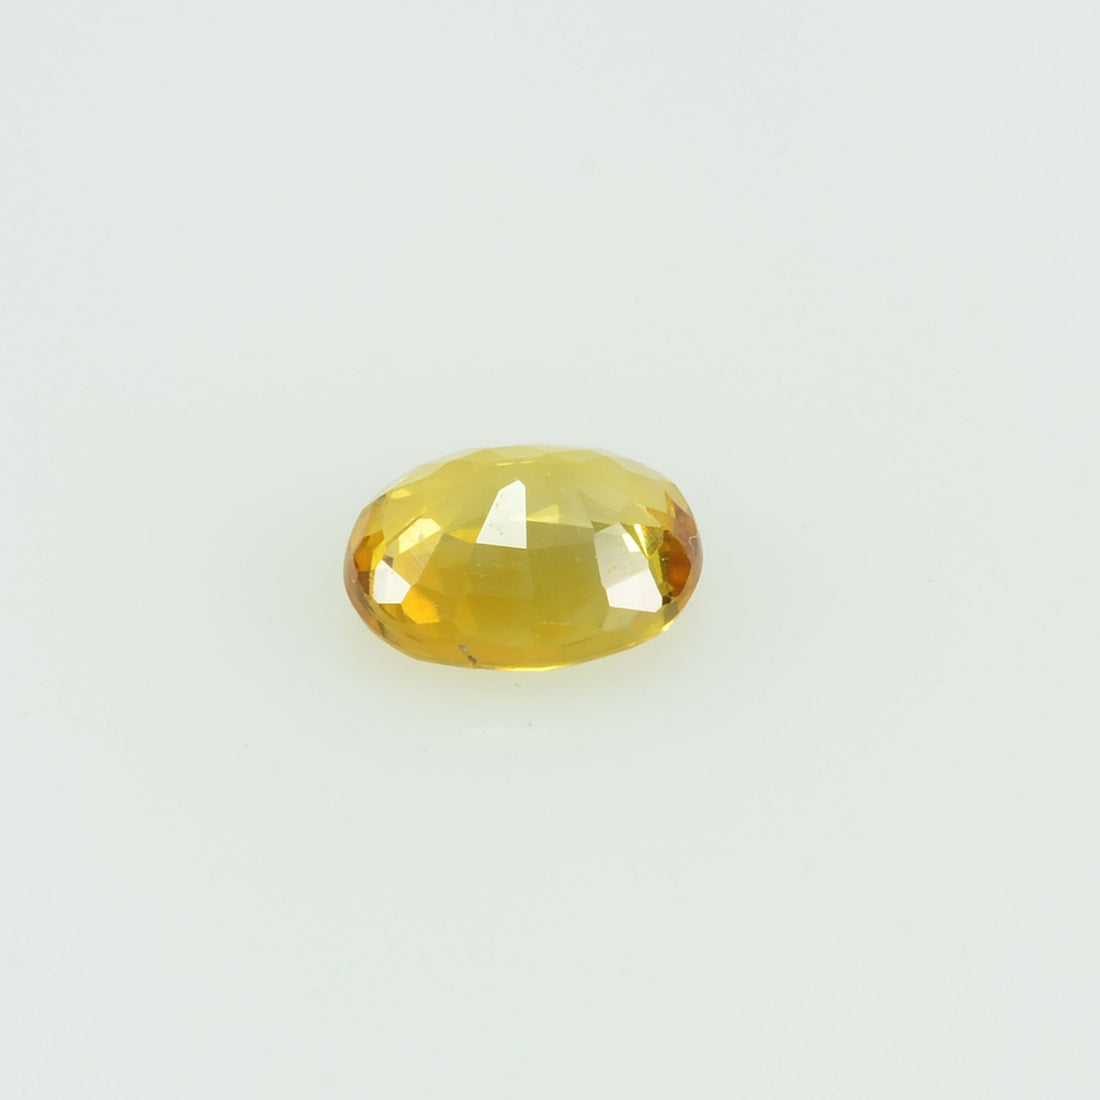 0.29 Cts Natural Yellow Sapphire Loose Gemstone Oval Cut